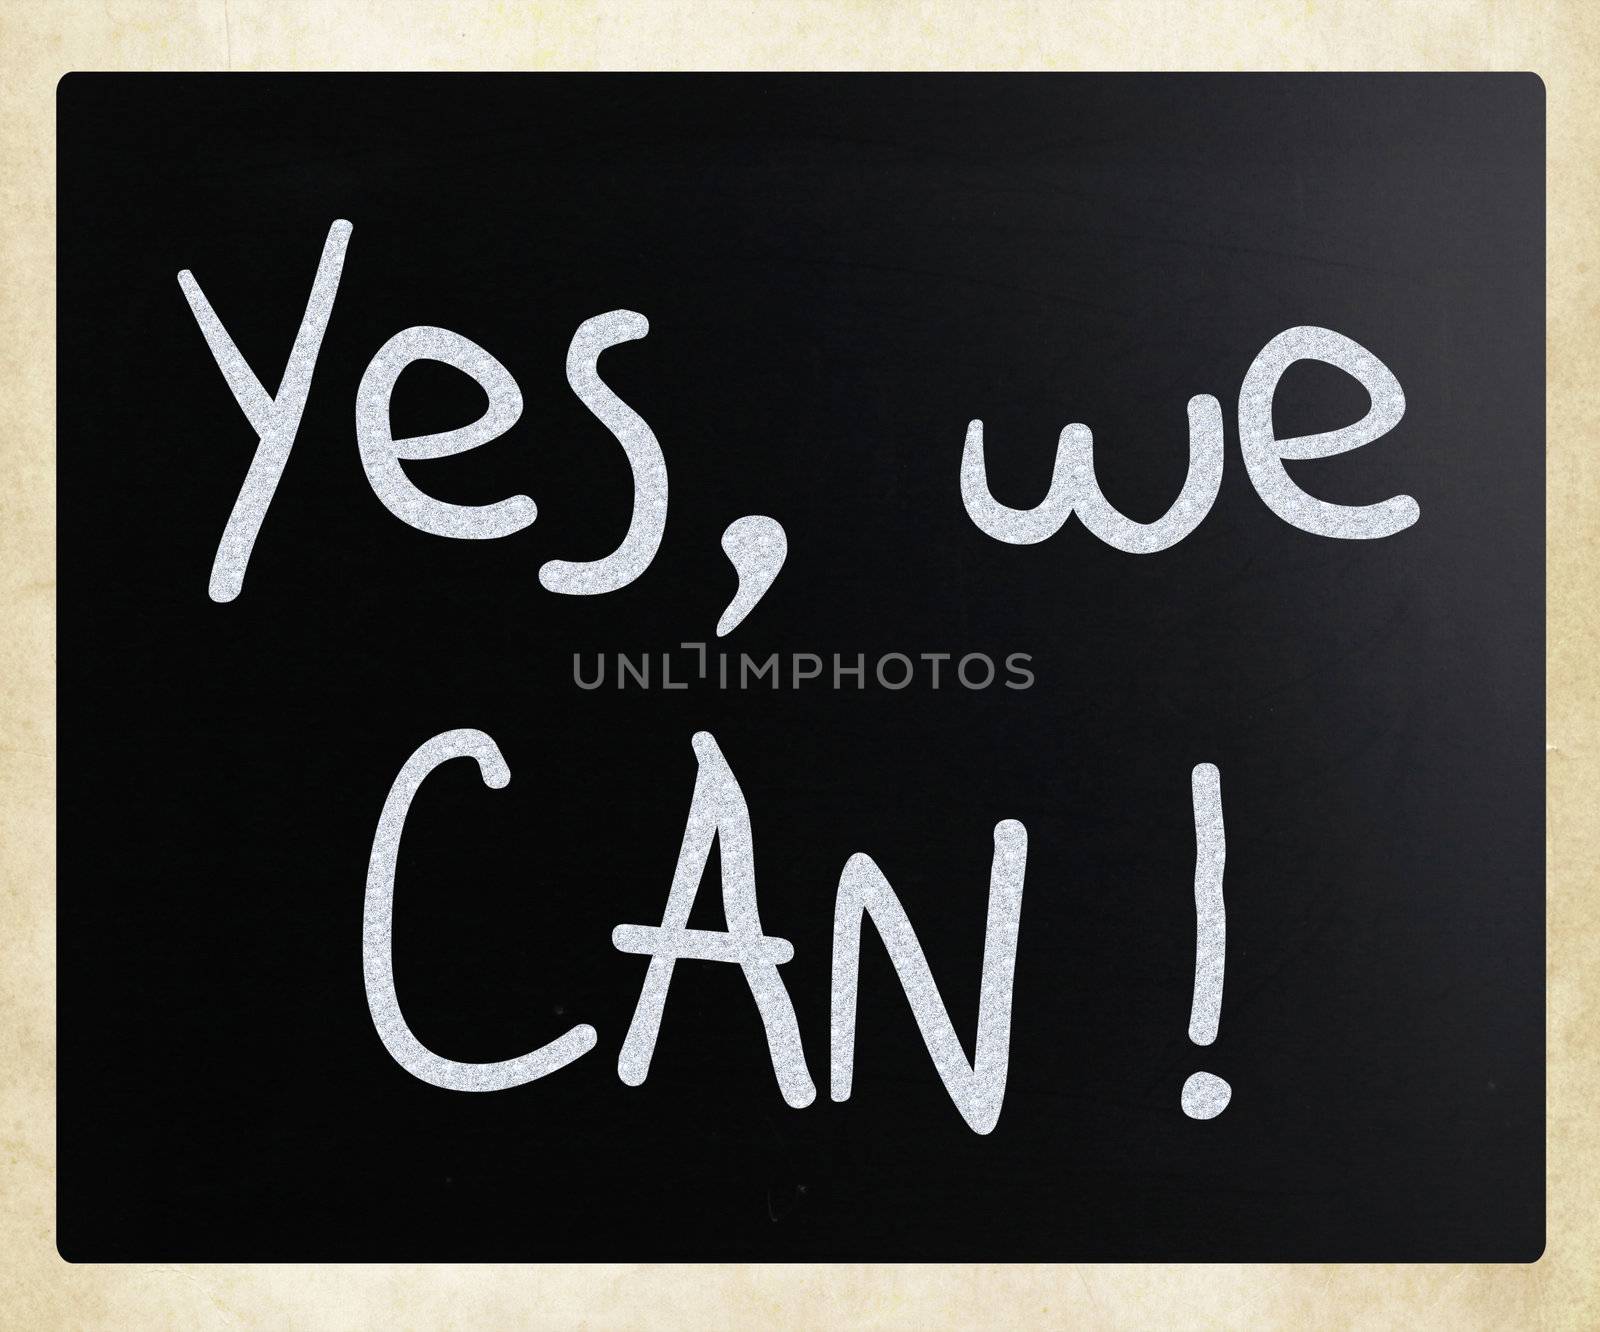 "Yes, we can!" handwritten with white chalk on a blackboard by nenov